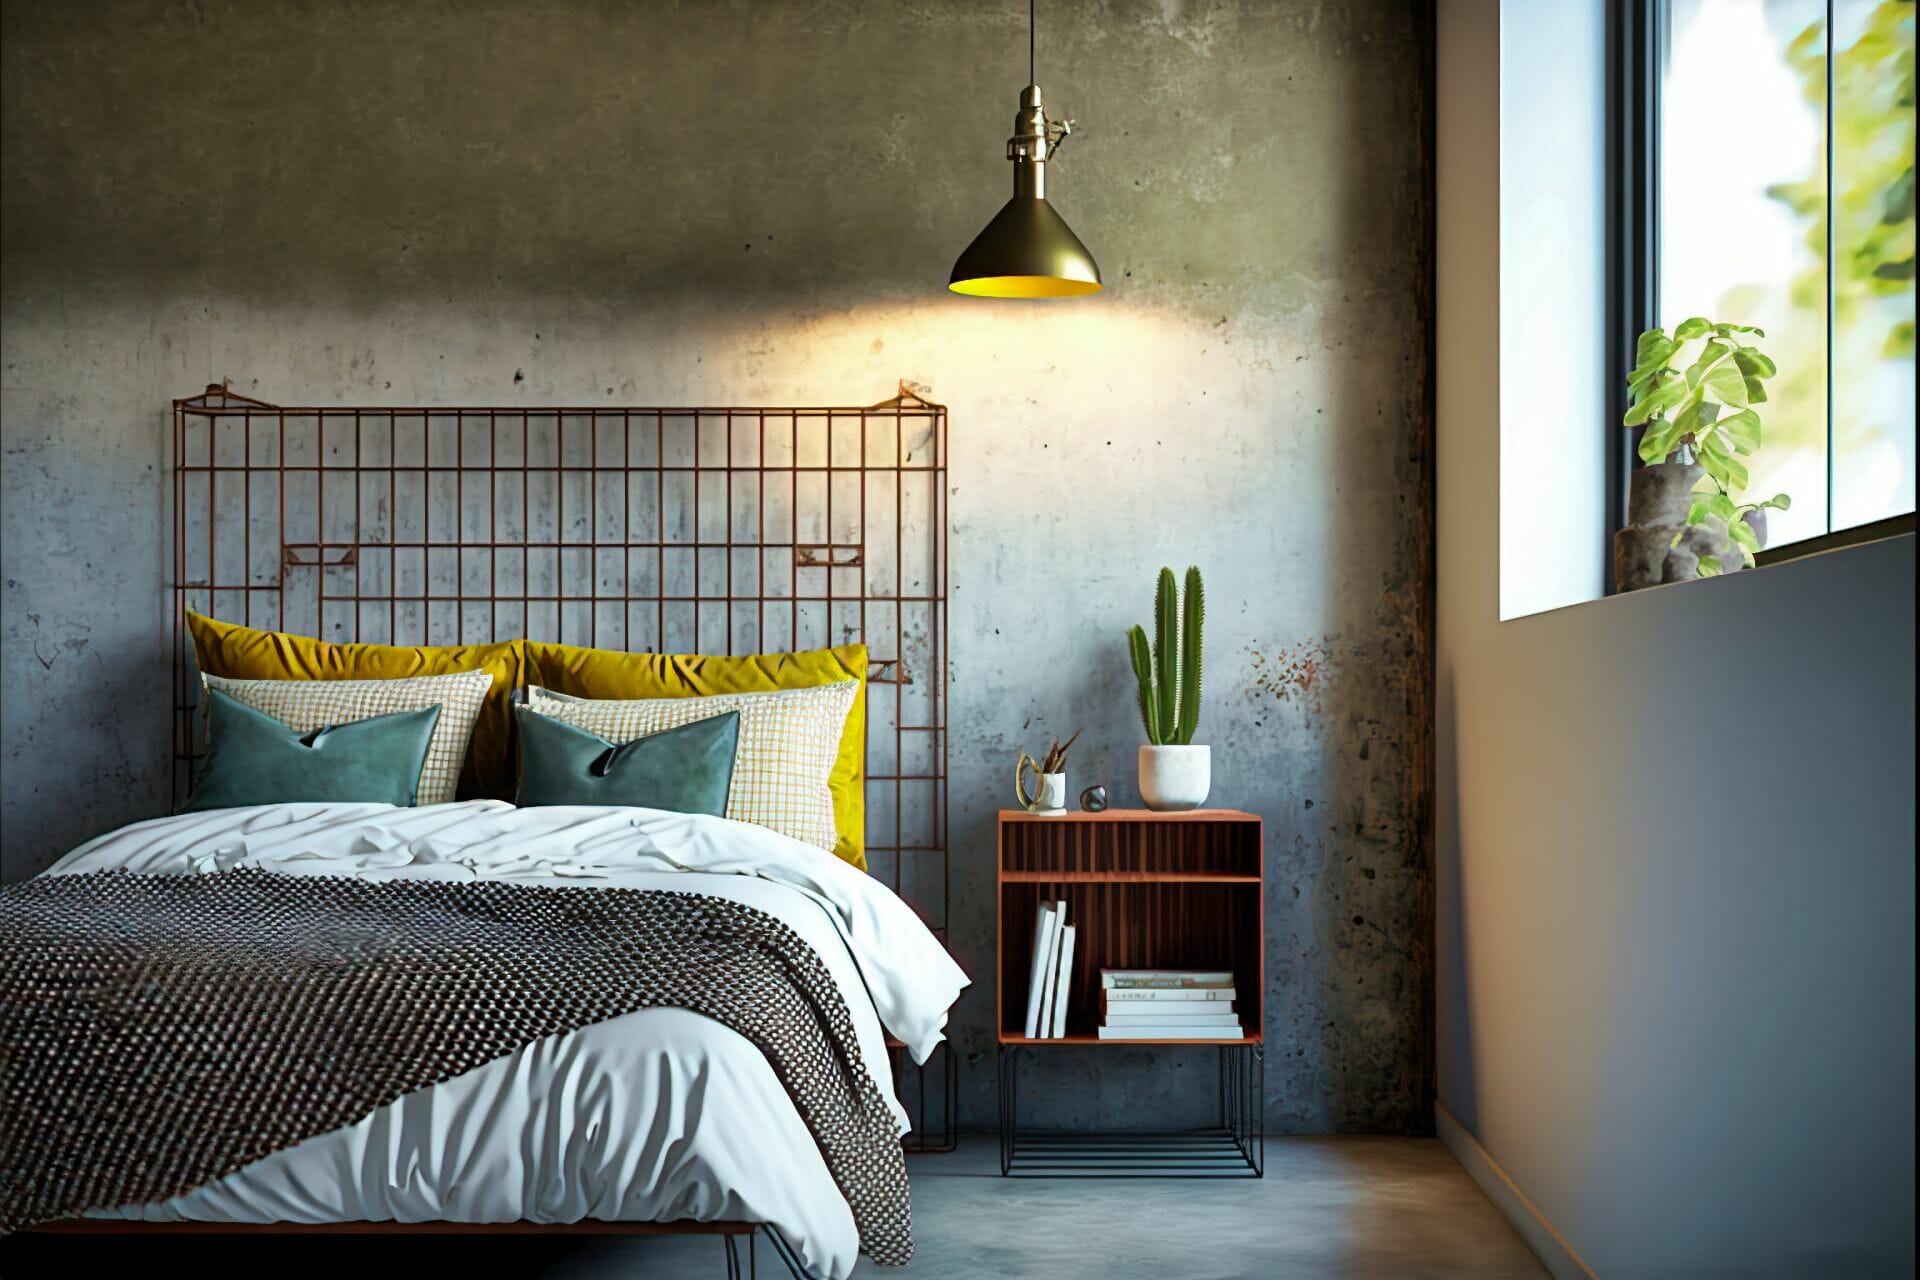 Mid-Century Modern Bedroom – An Industrial Modern Bedroom Featuring A Metal Bed Frame With A Concrete Headboard, A Wire Mesh Nightstand, And A Distressed Metal Wall Sconce.